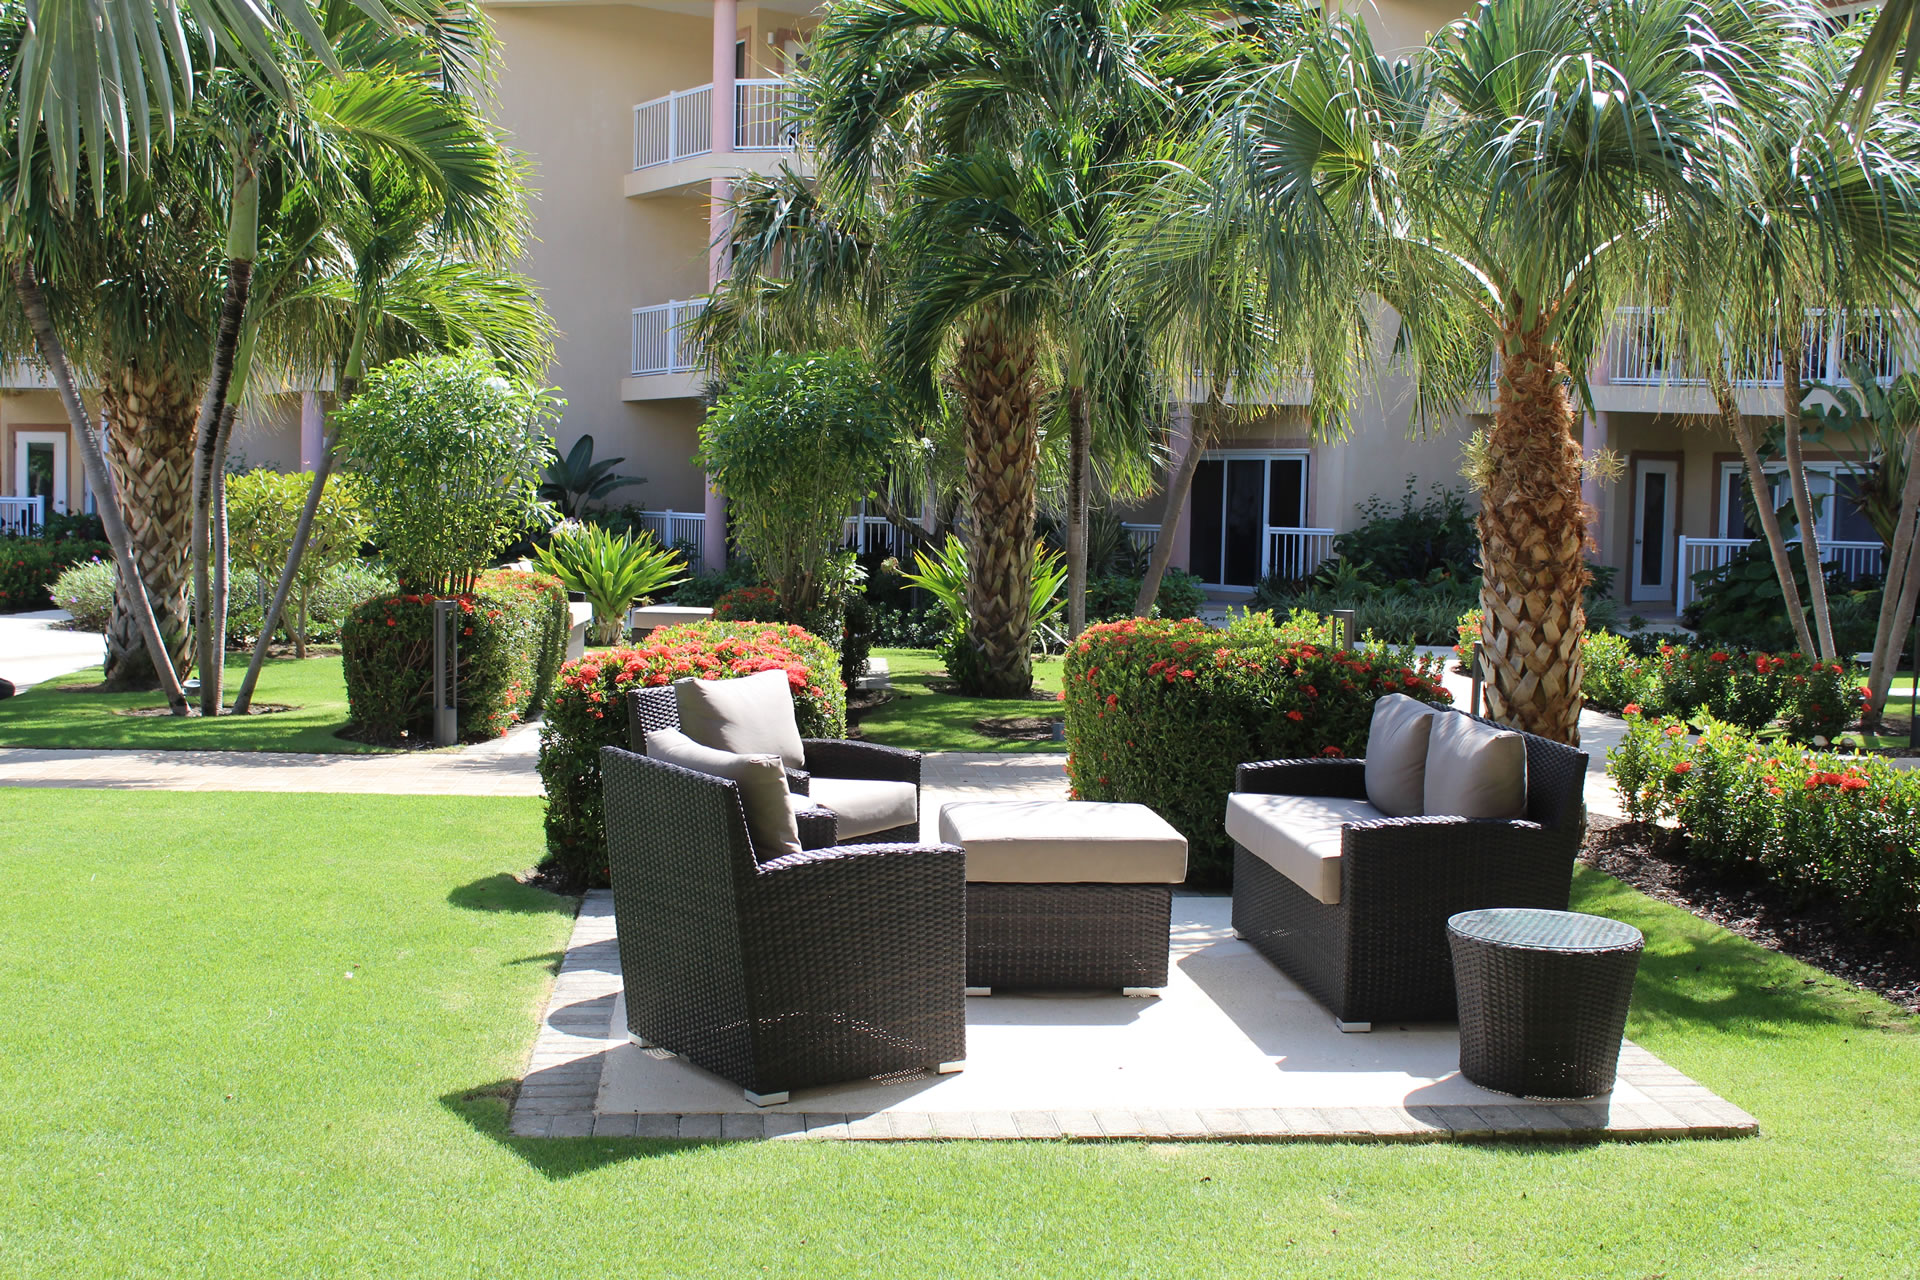 Outdoor patio furniture and seating area in the courtyard of the Grand Caymanian Resort.